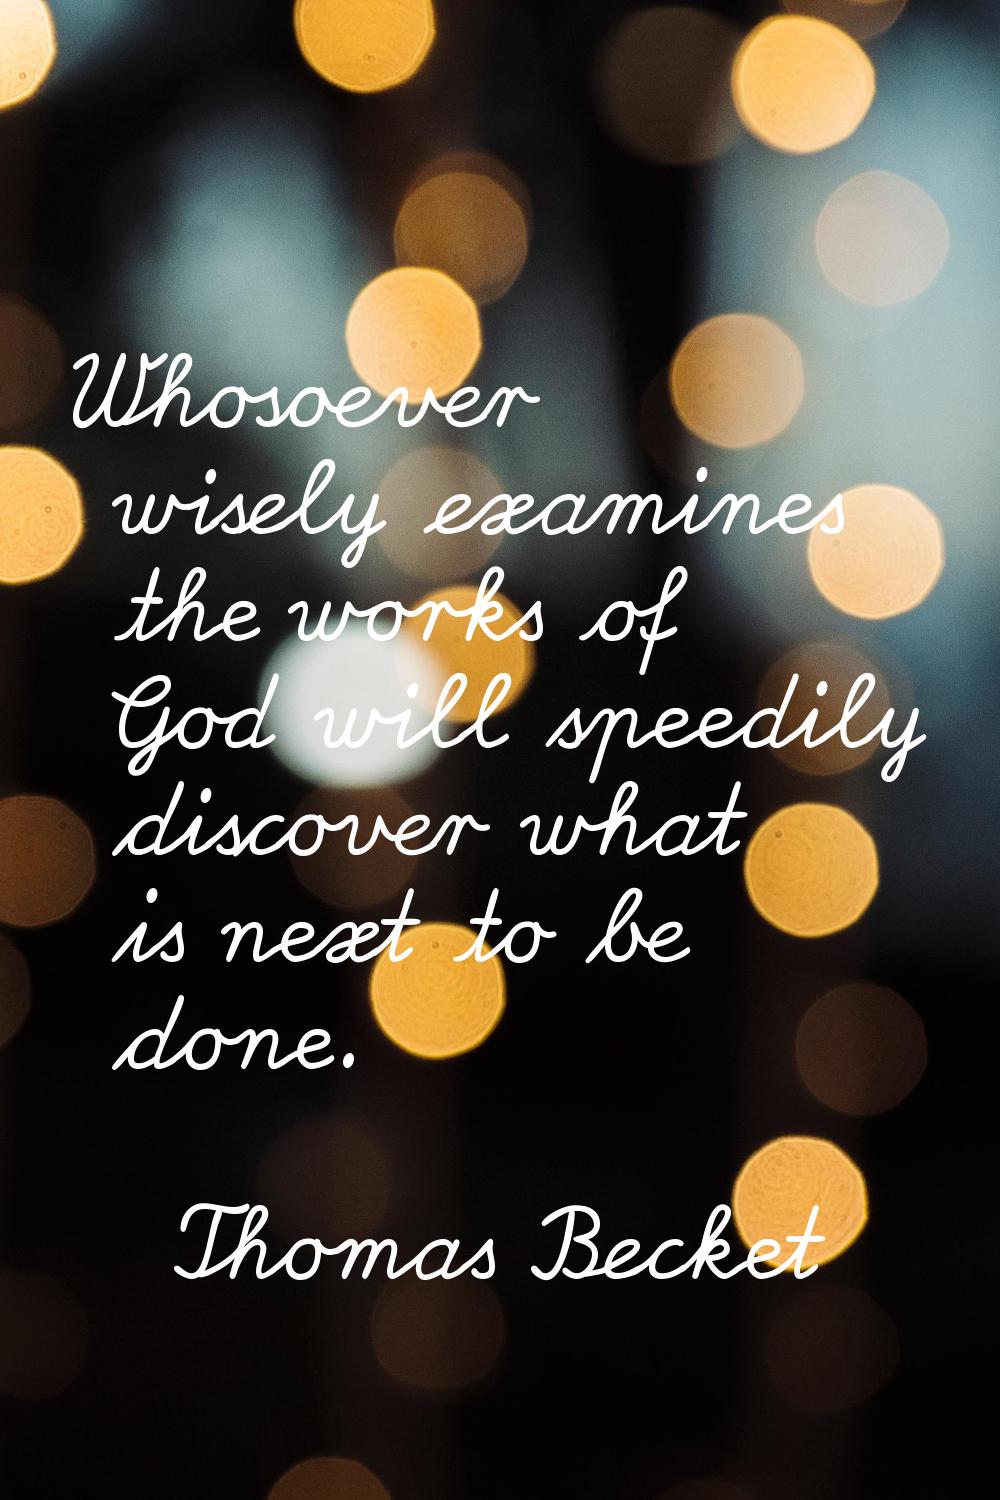 Whosoever wisely examines the works of God will speedily discover what is next to be done.